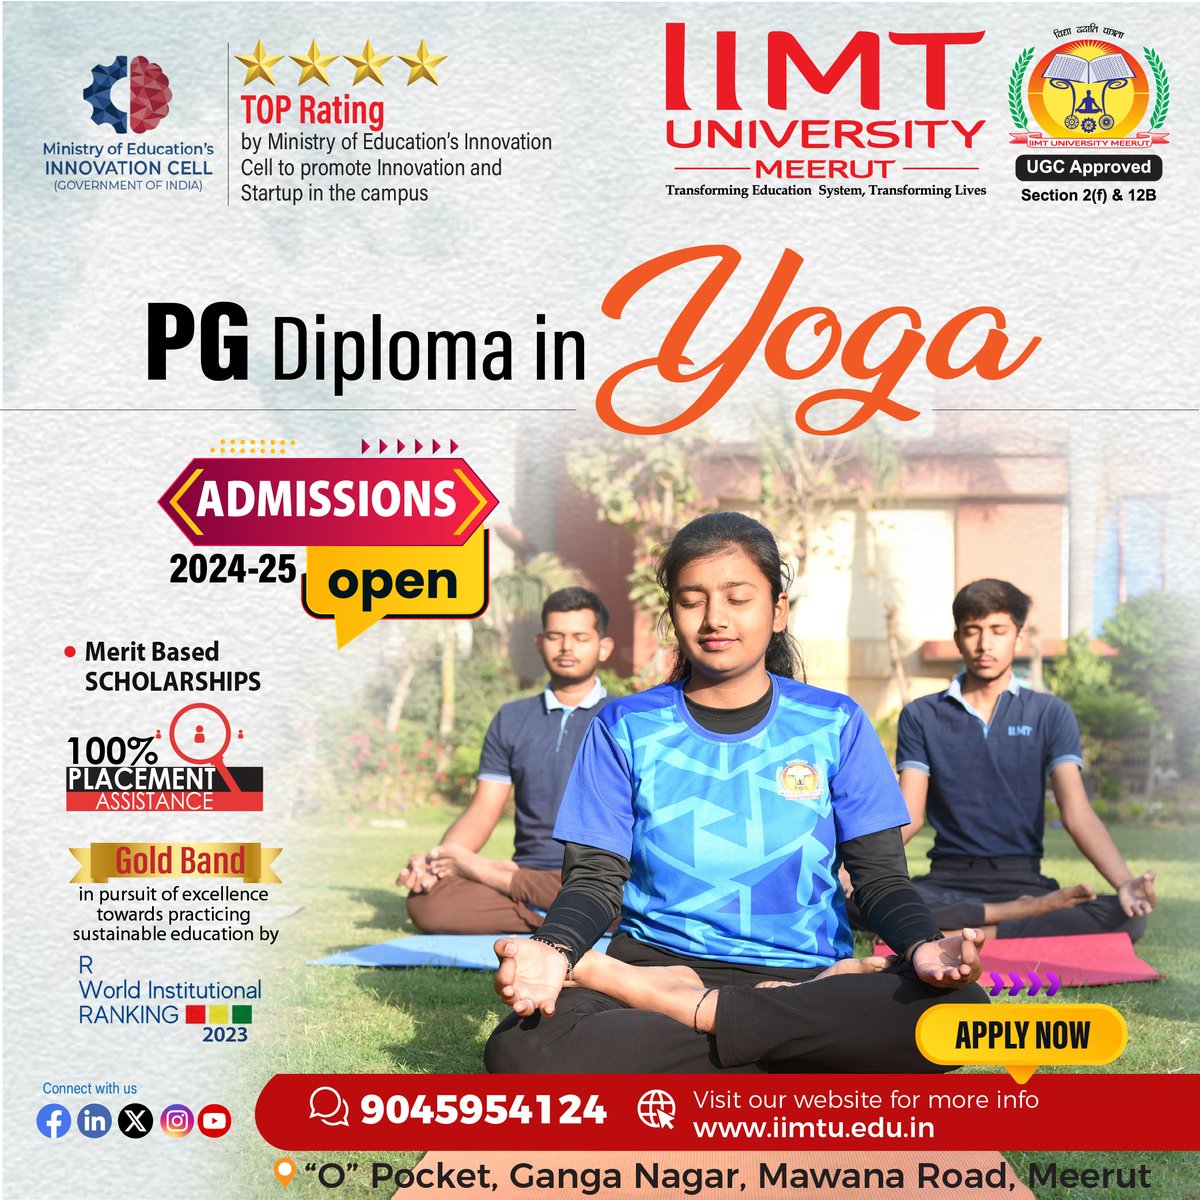 📜 Admissions Open in PG Diploma in Yoga for the session 2024-25

Apply Now @ bit.ly/3W6y1T2

#IIMTU #TransformingEducationSystem #TransformingLives

🌐iimtu.edu.in  📱+91-9045954124

#AdmissionsOpen2024 #PGDiplomaYoga #Admissions2024
#Yoga #PGDiploma